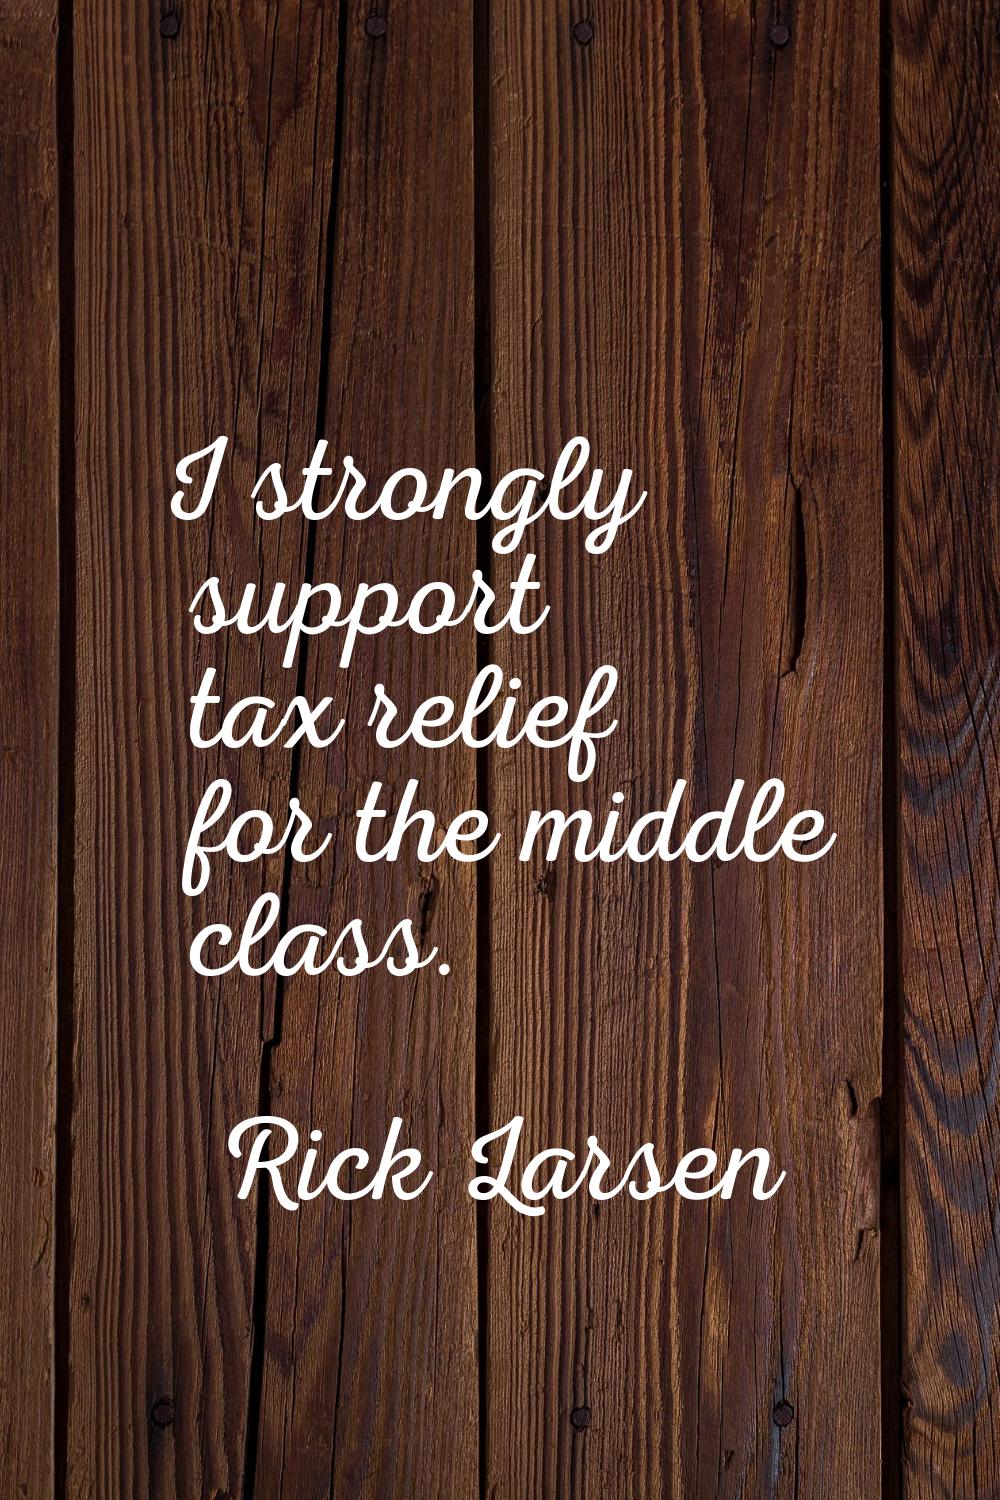 I strongly support tax relief for the middle class.